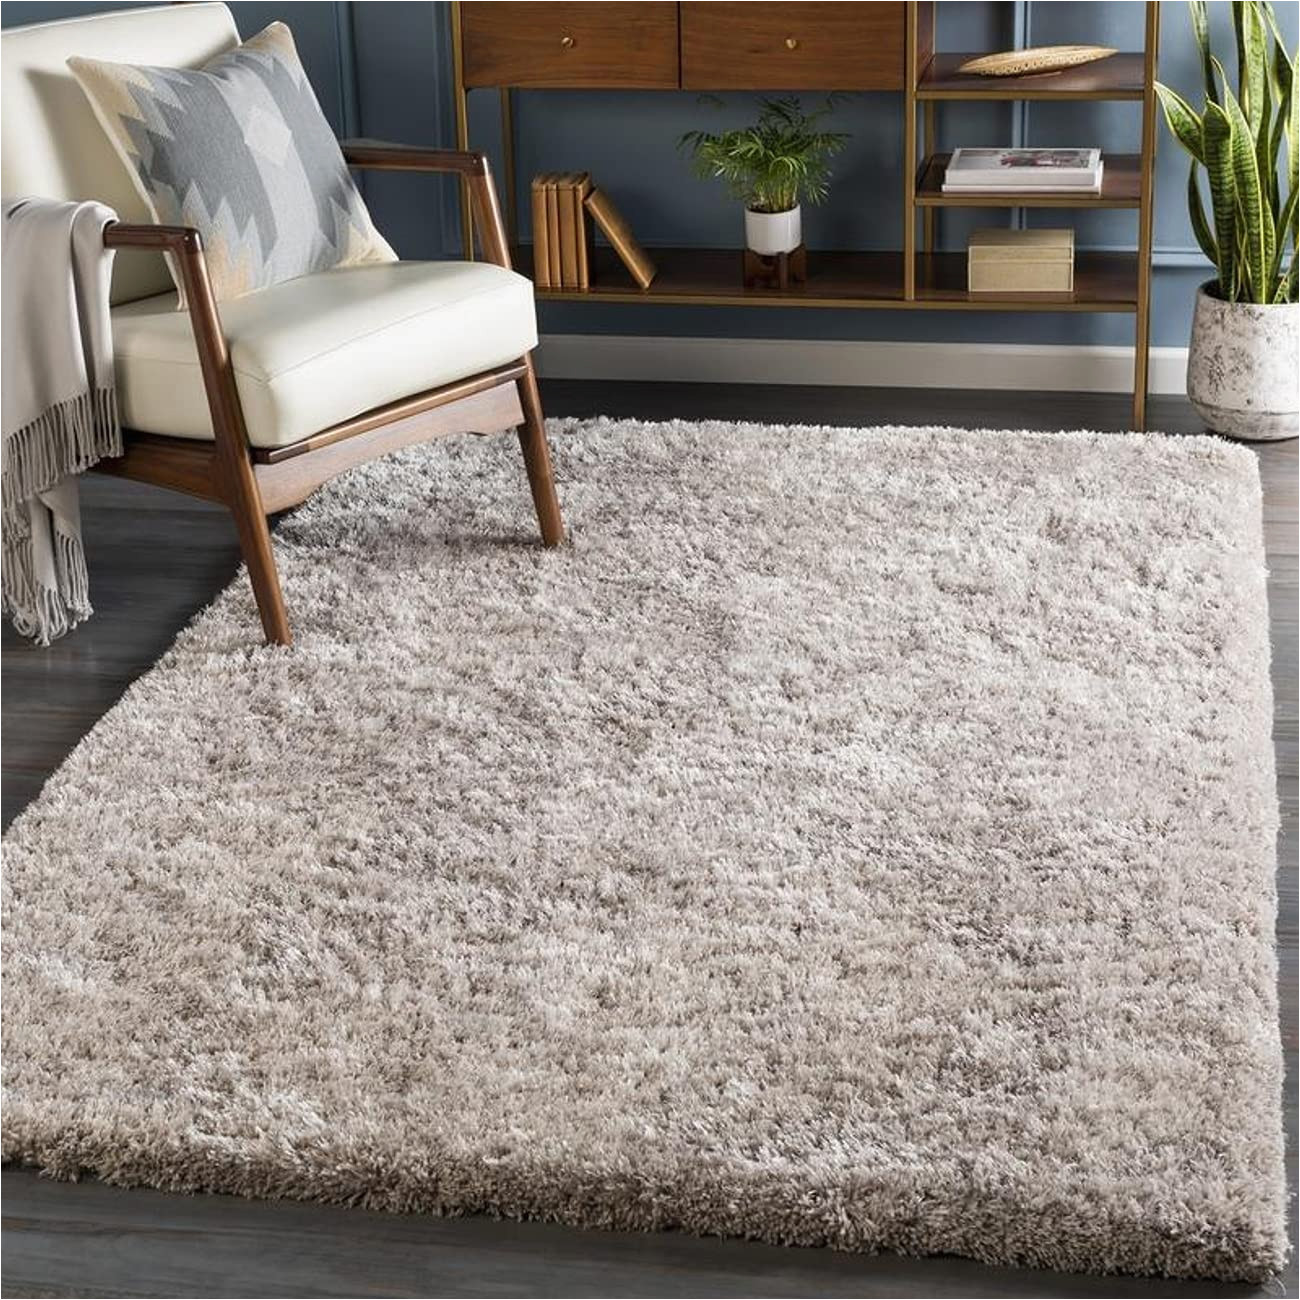 Cheap area Rugs 10 X 14 Mark&day area Rugs, 10×14 Cambrai Shag Light Gray area Rug, Gray / Beige / White Carpet for Living Room, Bedroom or Kitchen (10′ X 14′)